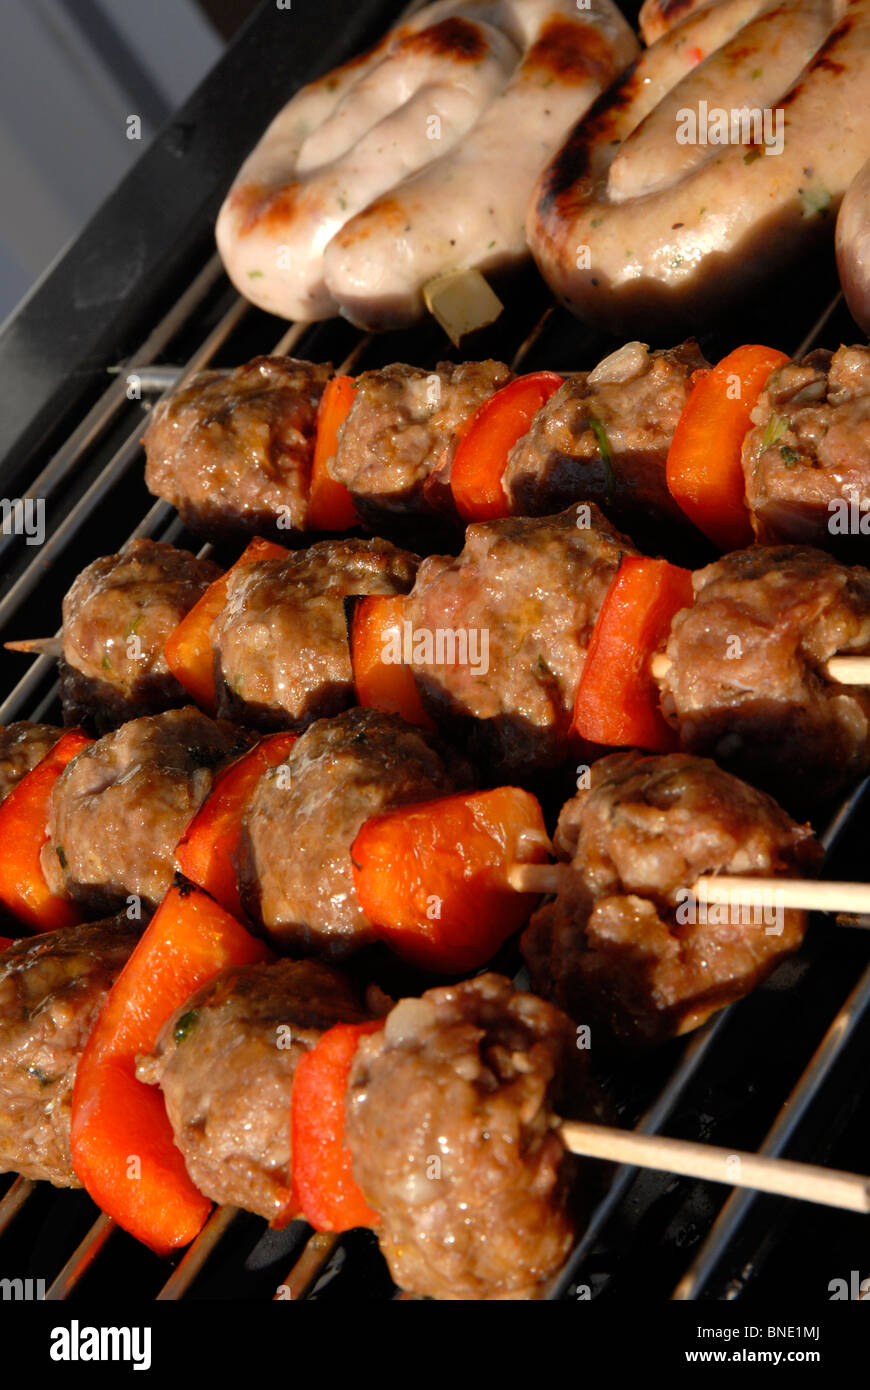 Lamb kebabs on barbeque Stock Photo